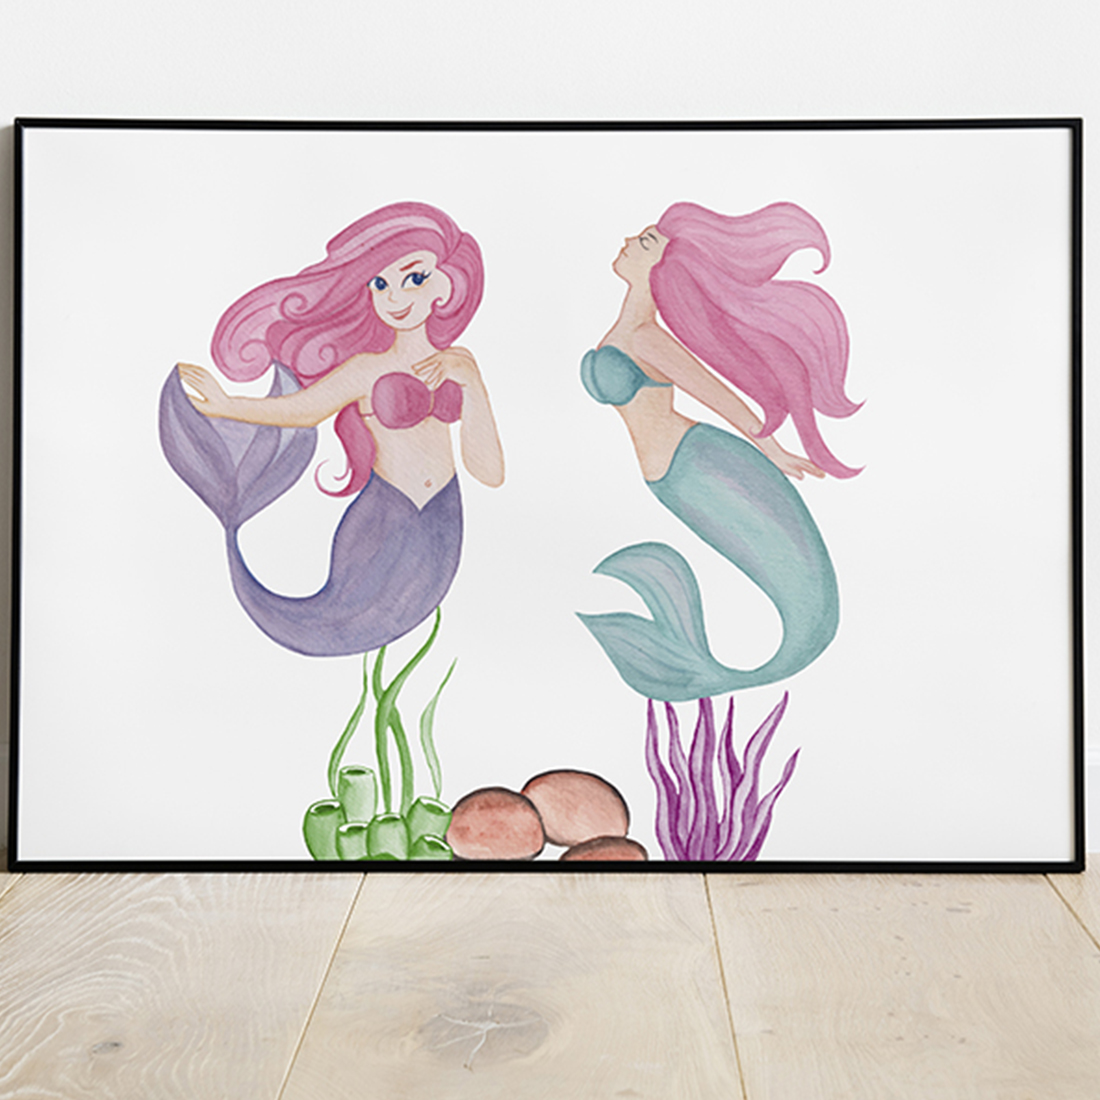 Gorgeous watercolor painting of the little mermaid